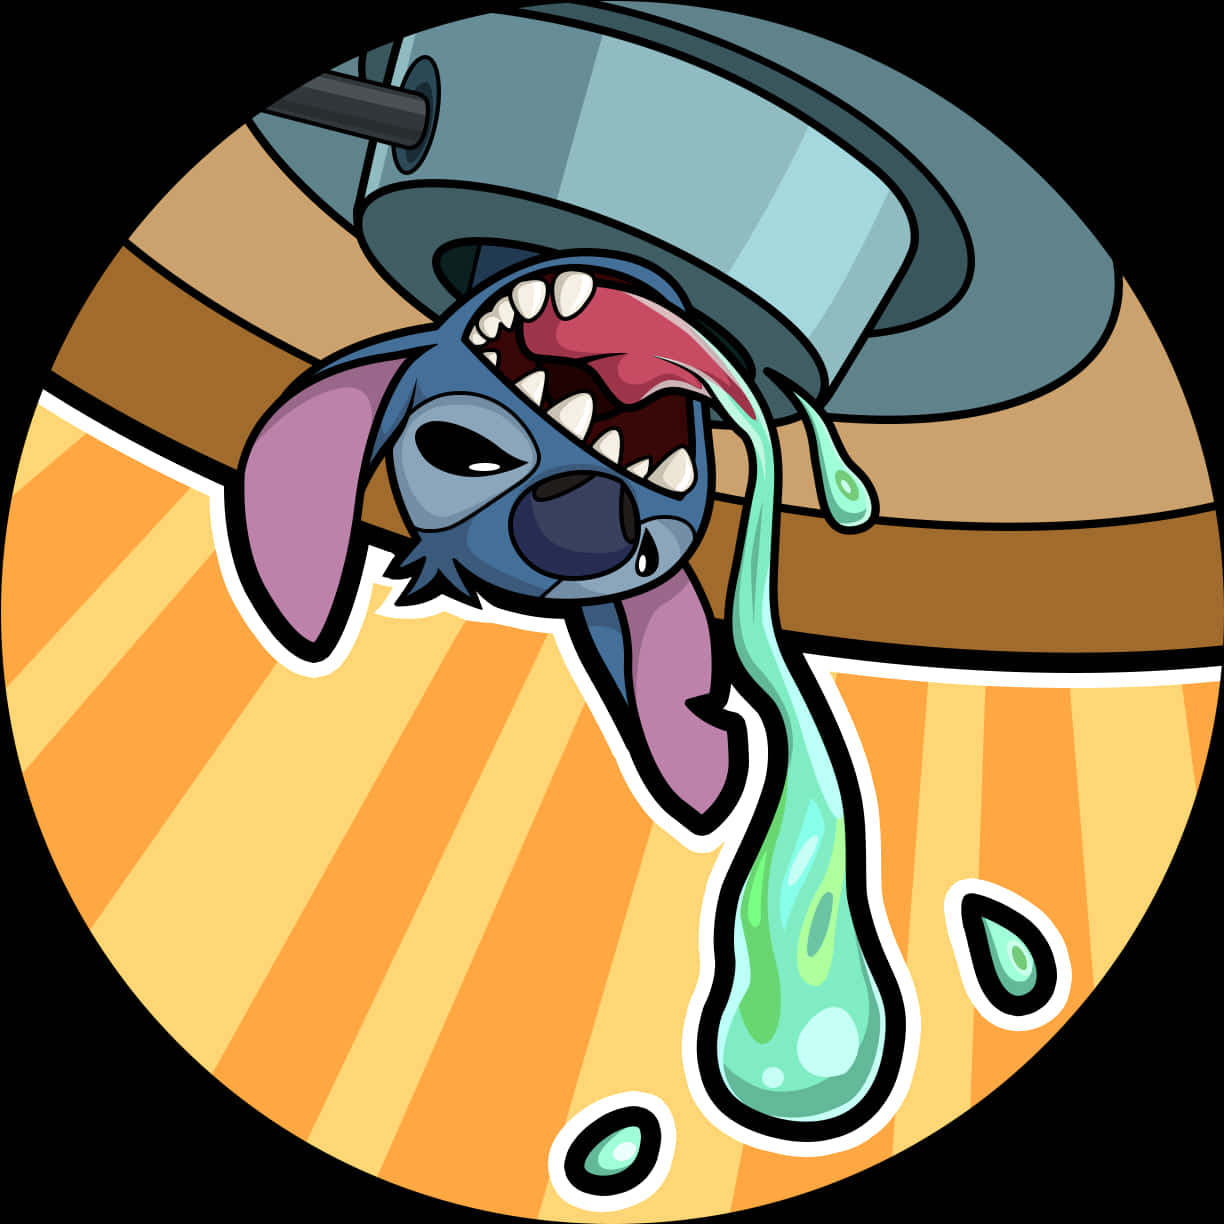 A Cartoon Of A Dog Drinking From A Faucet